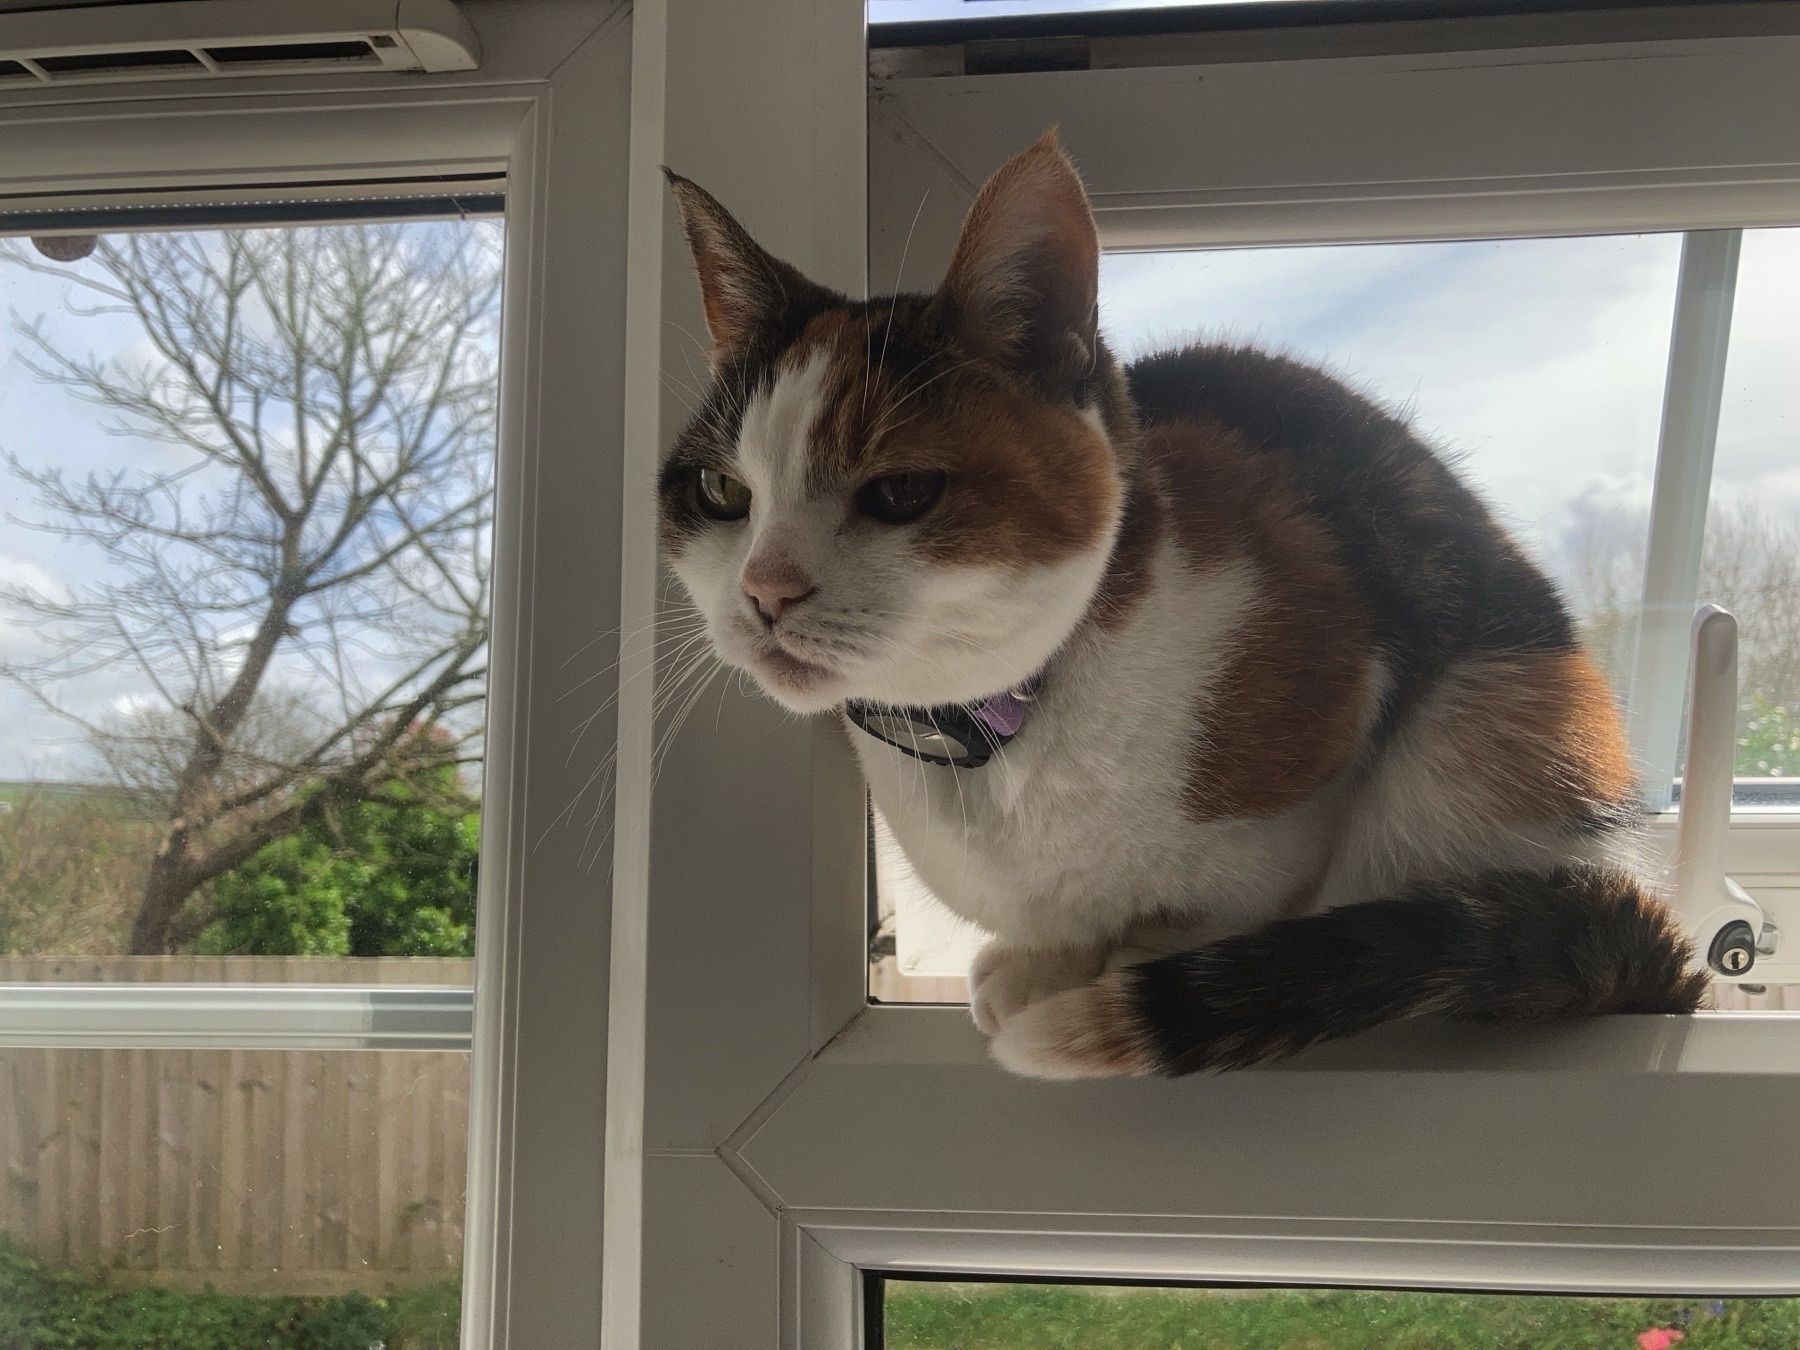 A tortoiseshell calico cat, perching in the gap of a small opened window. The sunlight behind her reveals part of the garden fence and foliage.